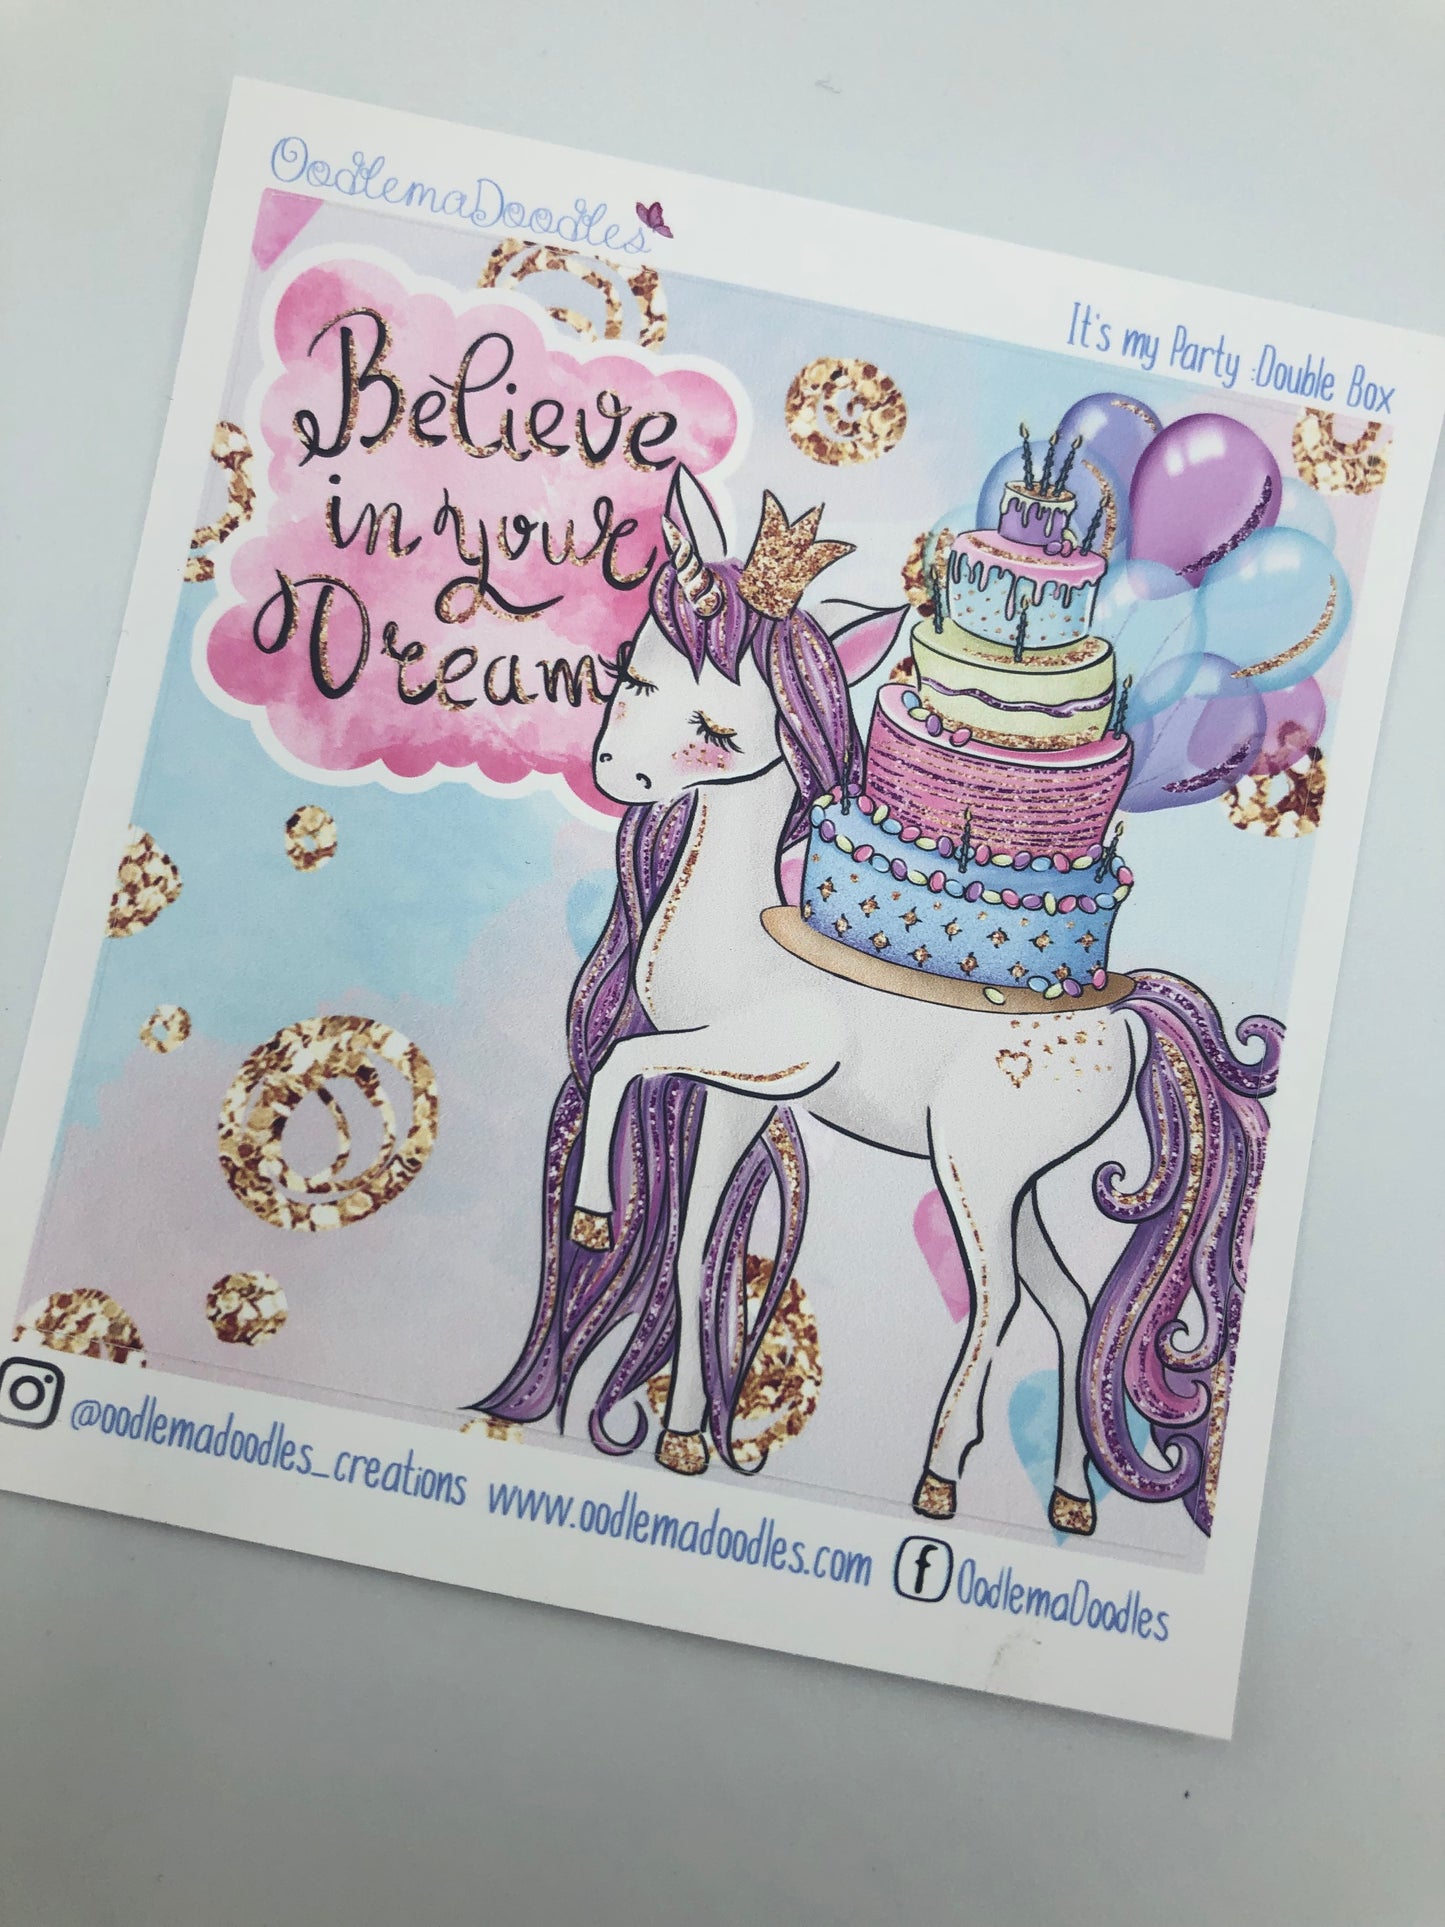 It's my Party - Decorative Double Box Sticket